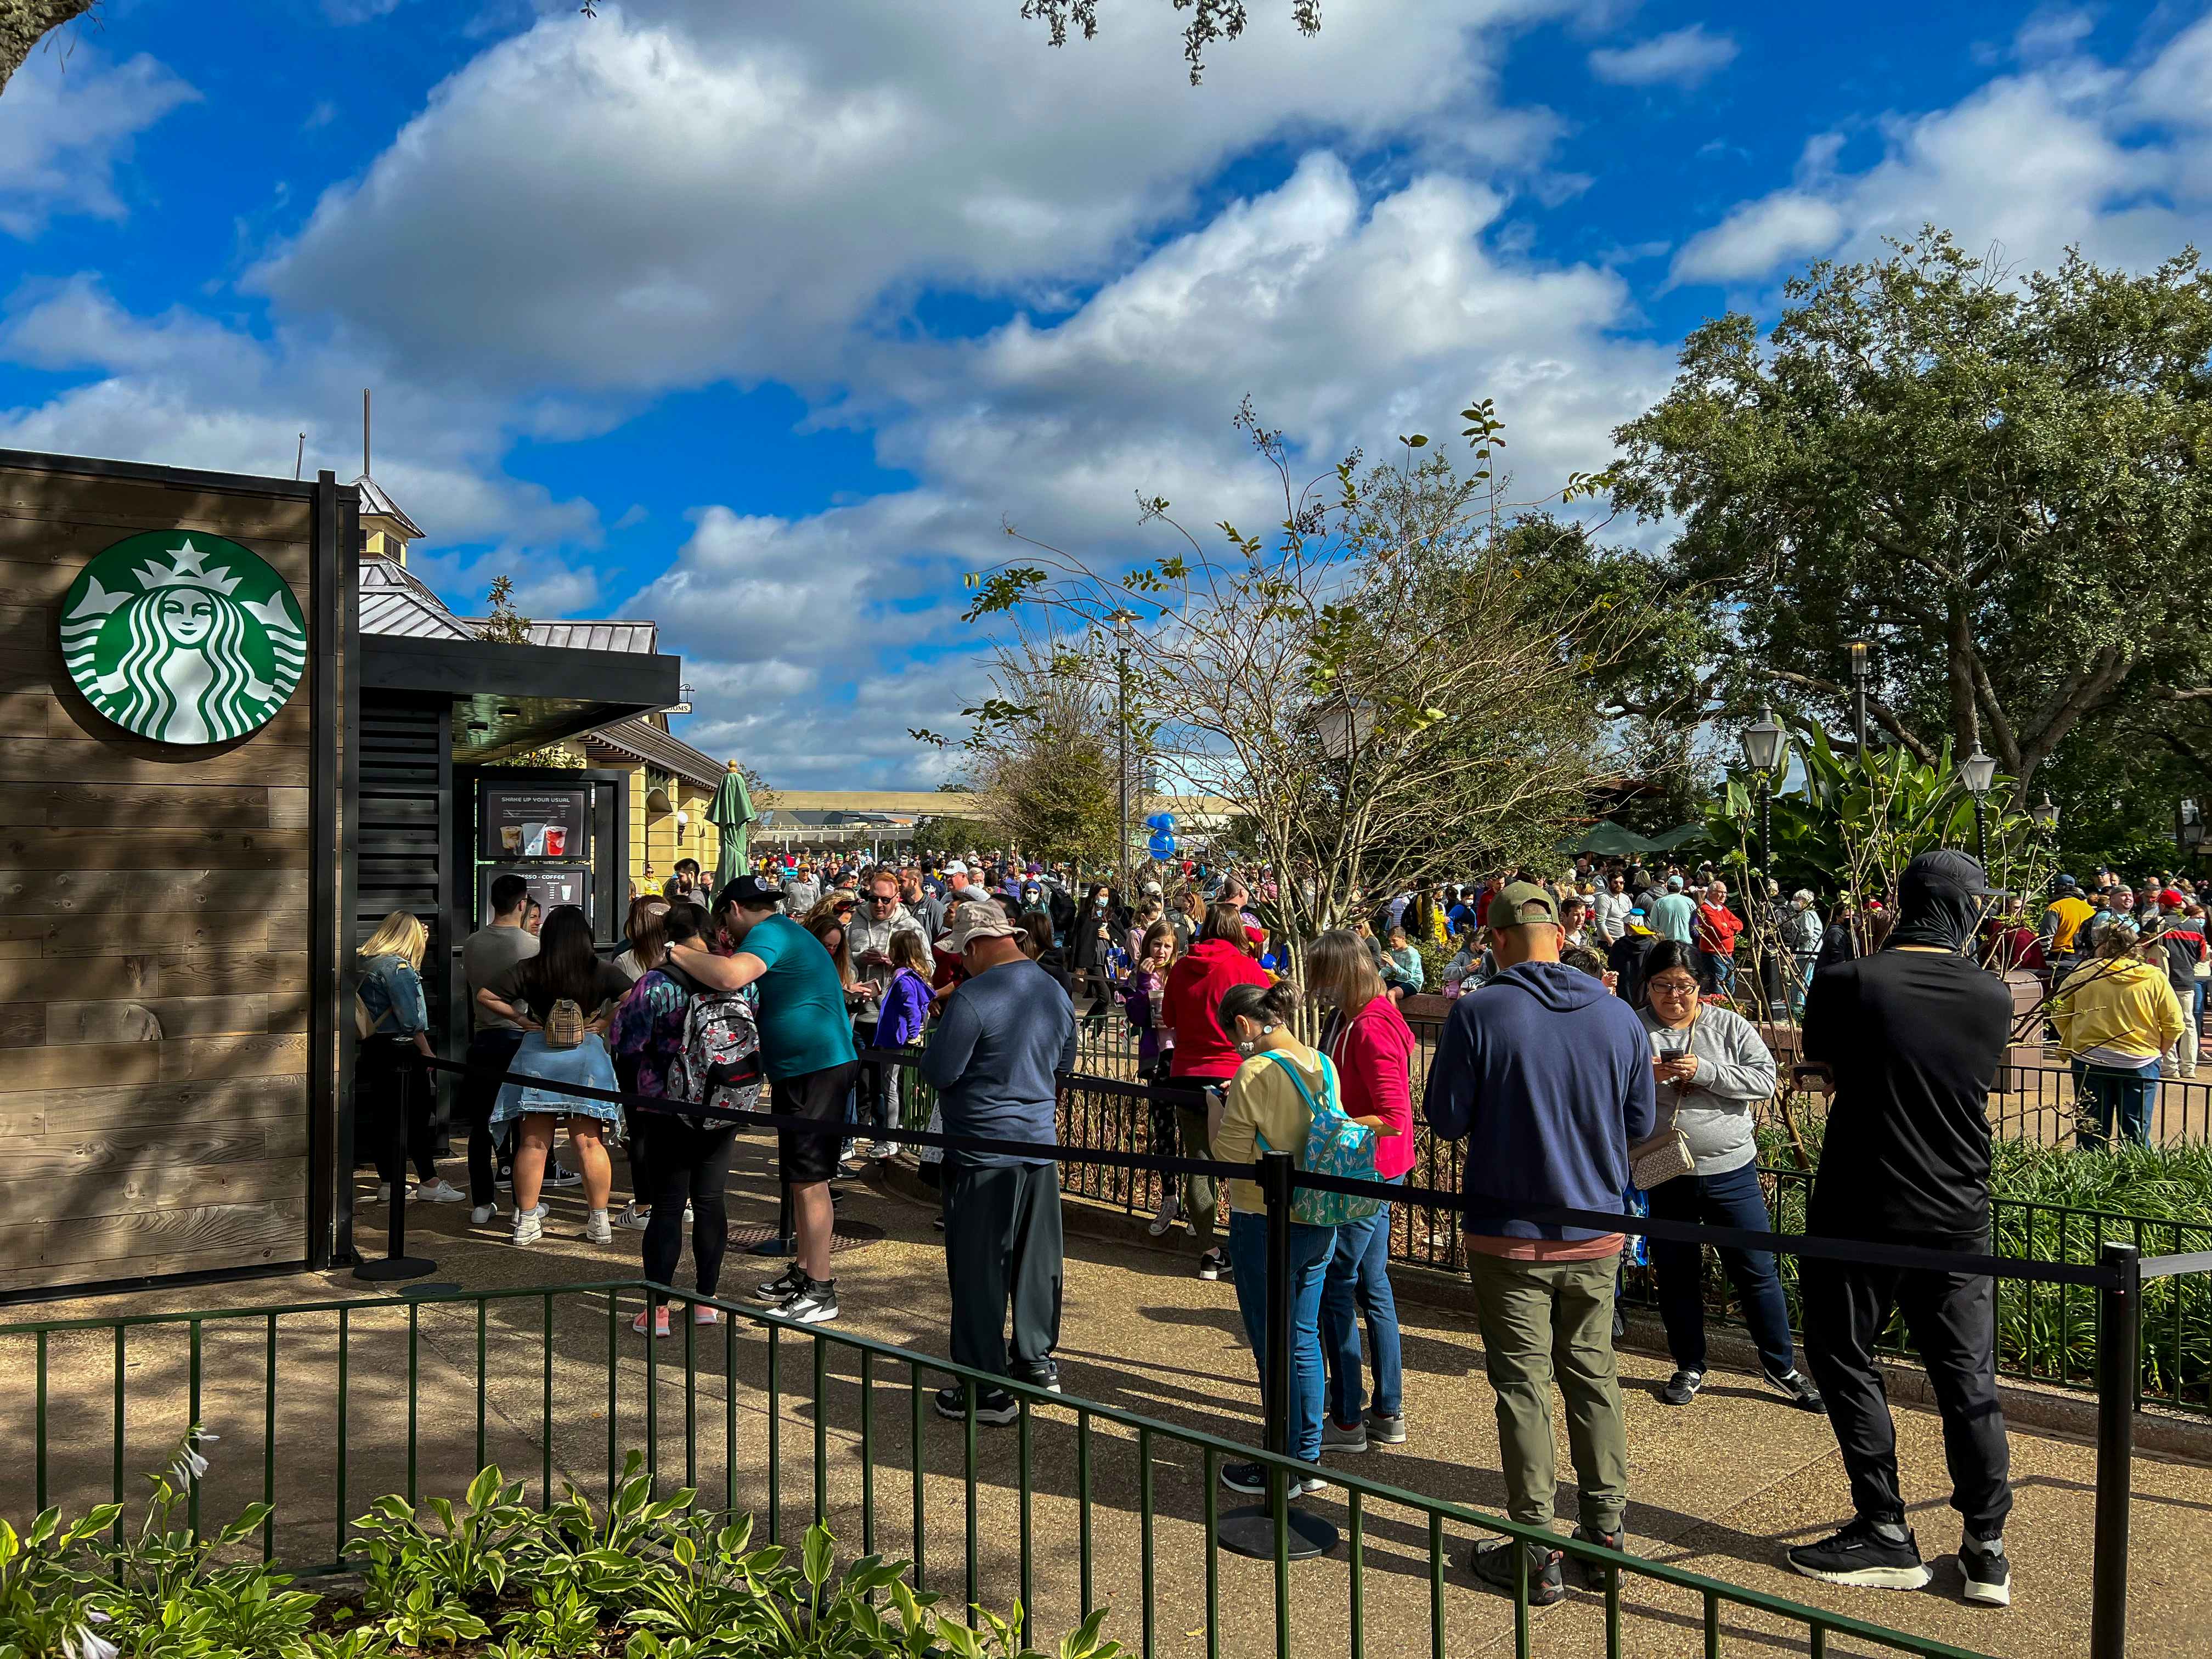 People waiting in a long line for the Starbucks inside the Disney World park.